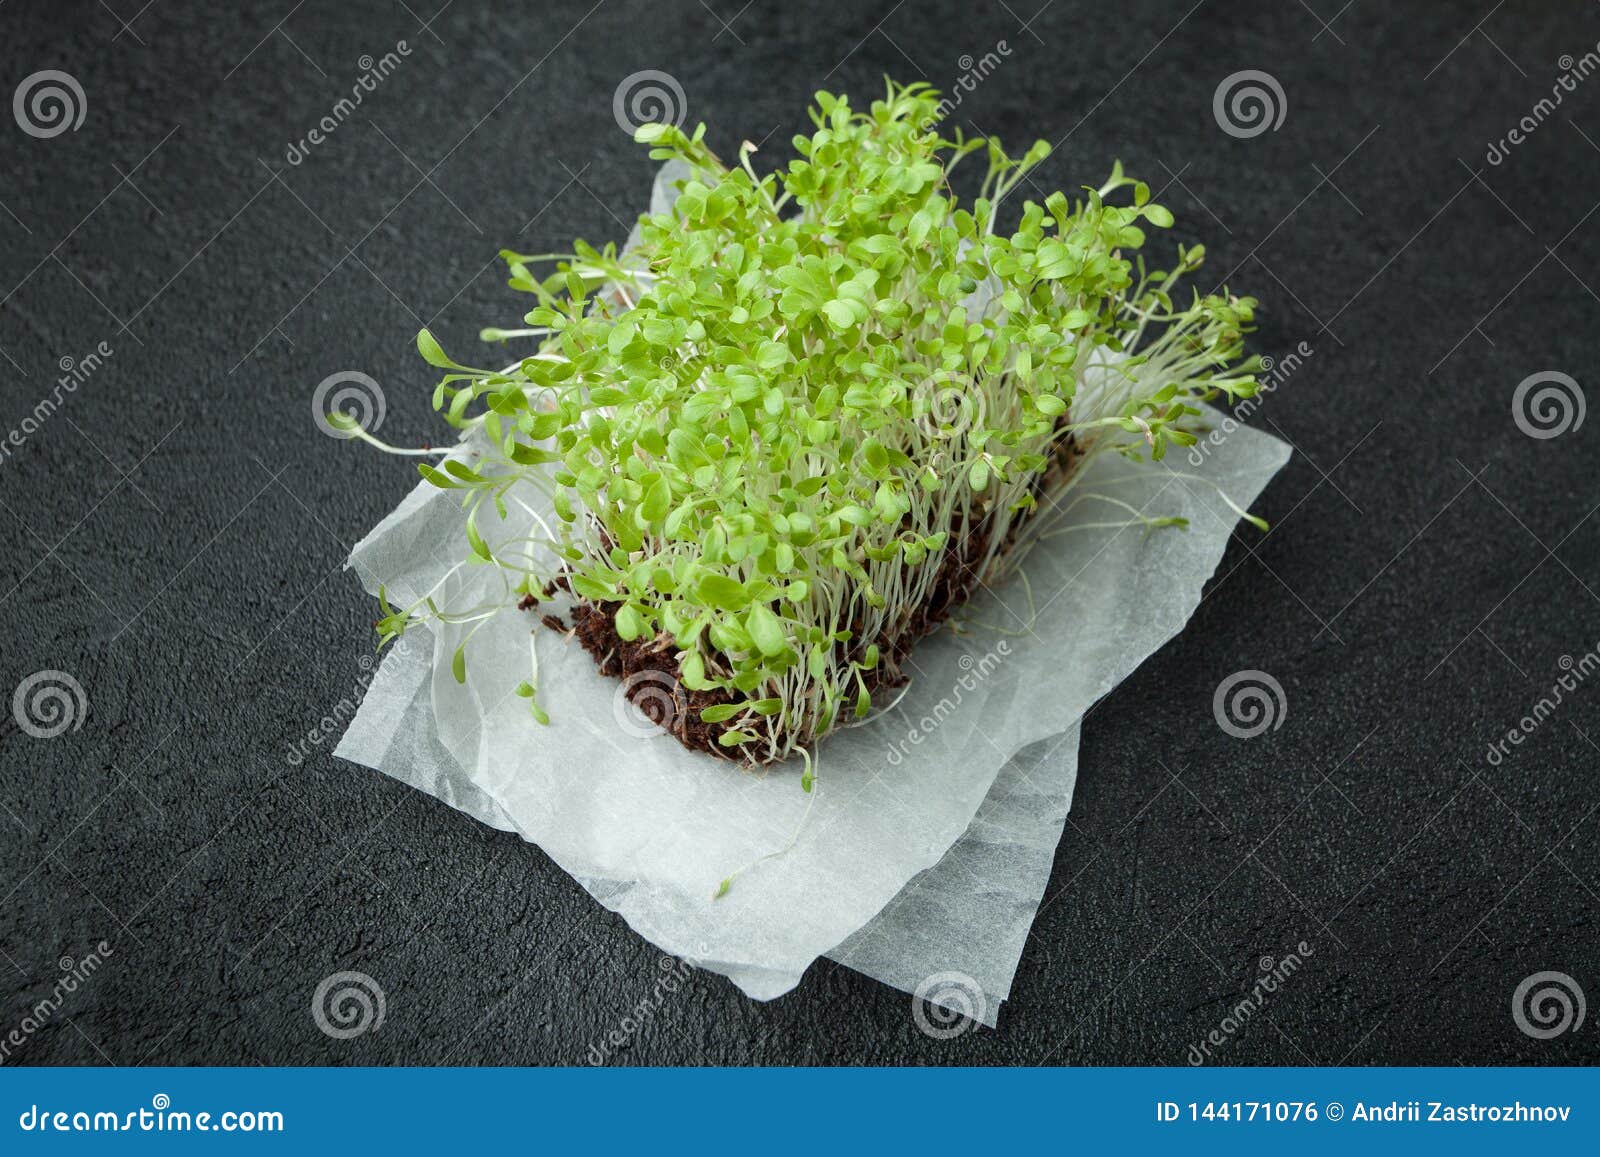 fresh micro-green salad with roots on paper on a black background. immunity stimulant and prolongation of youth